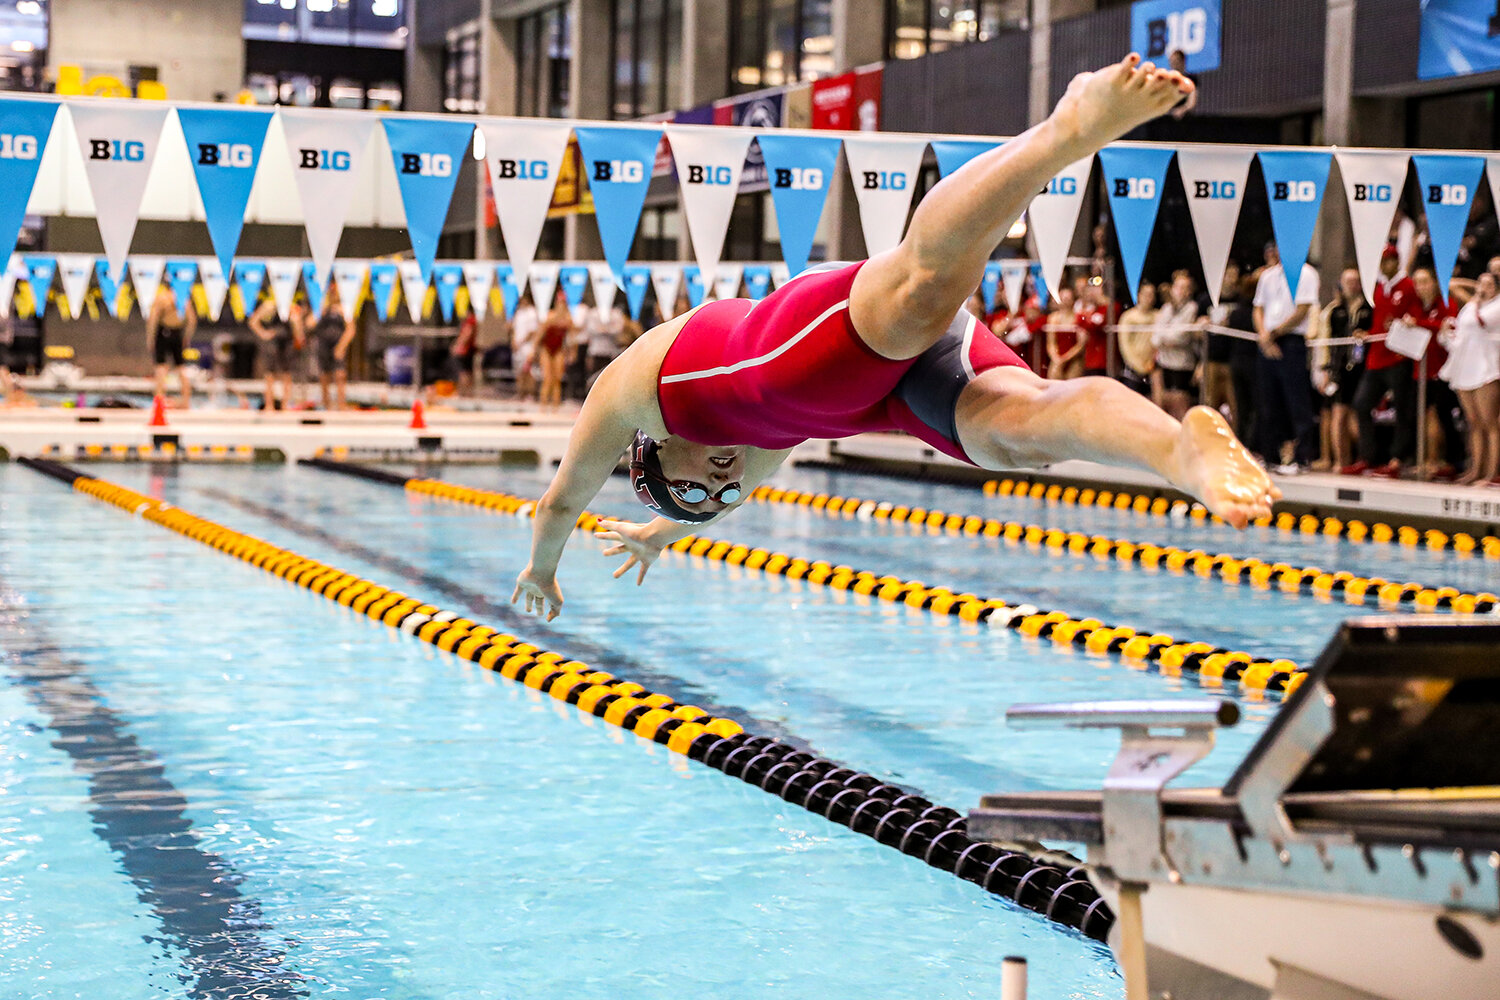  Kasja Dymek swims a preliminary heat of the 100 yard butterfly during the Big Ten Women’s Swimming and Diving Championships at the Campus Welfare and Recreation Center in Iowa City, IA on Friday, Feb. 21, 2020.  